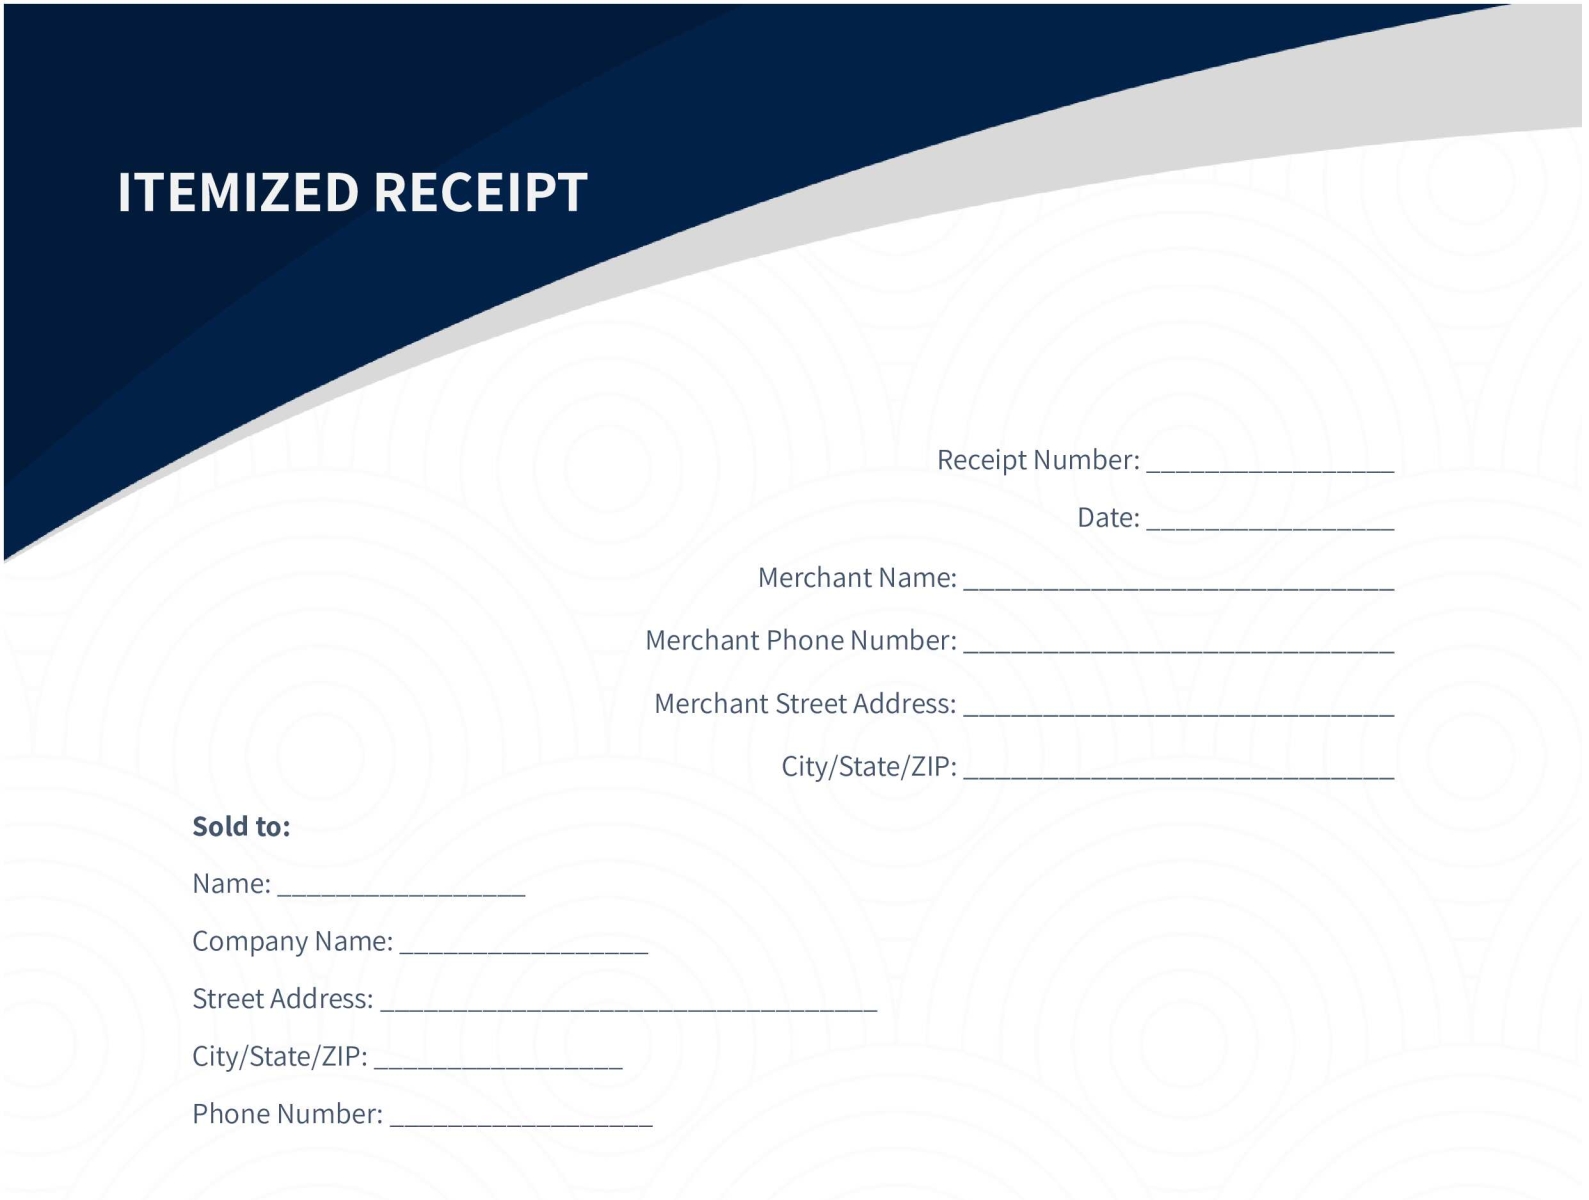 itemized-receipt-template-by-free-google-docs-google-slide-templates-on-dribbble